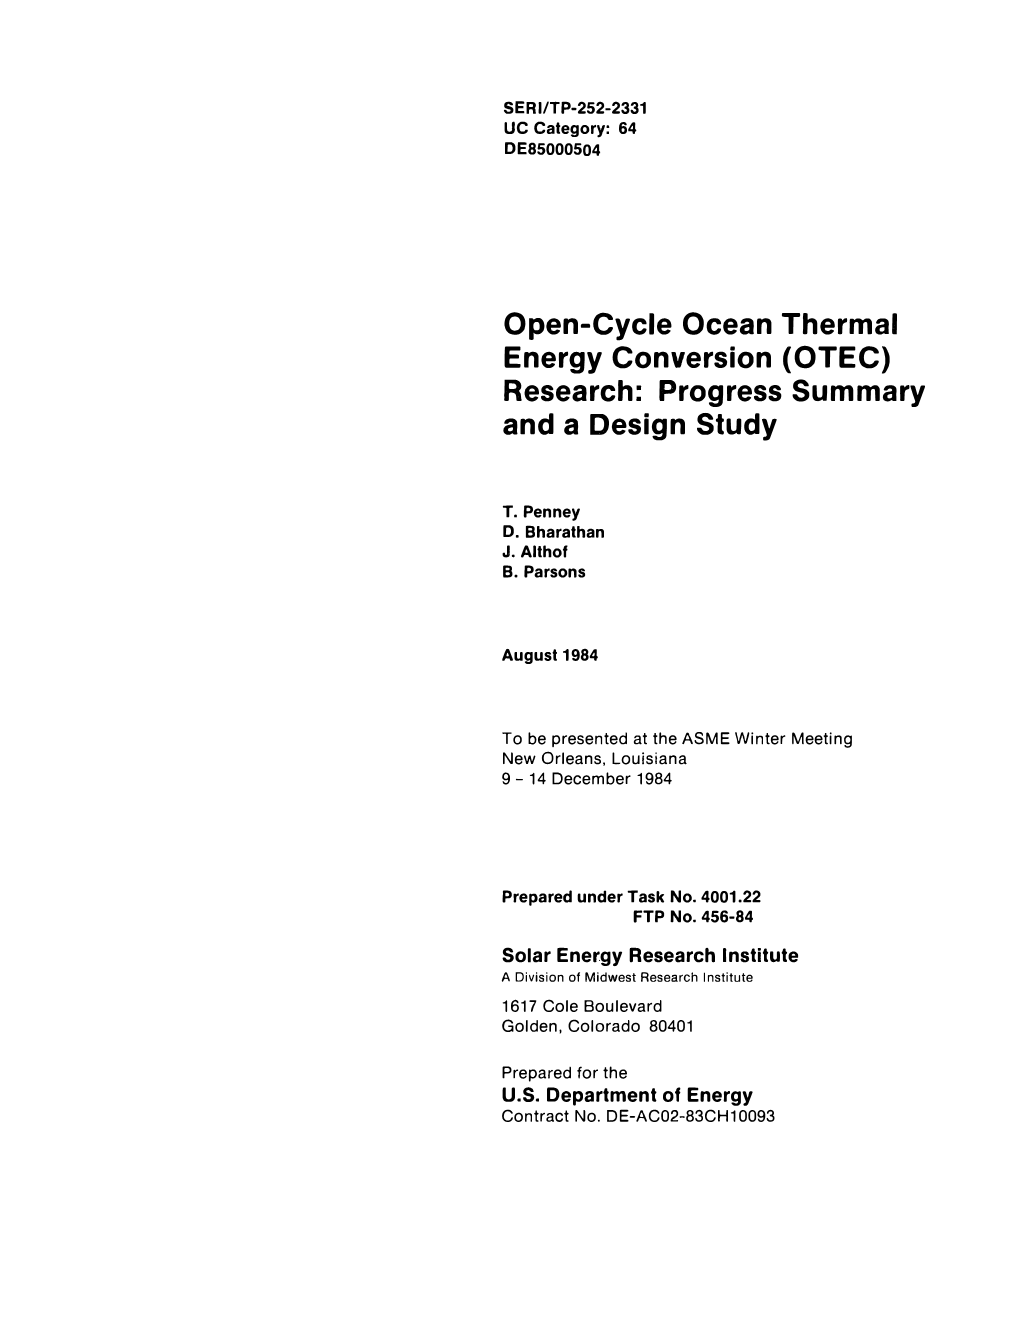 Open-Cycle Ocean Thermal Energy Conversion (OTEC) Research: Progress Summary and a Design Study